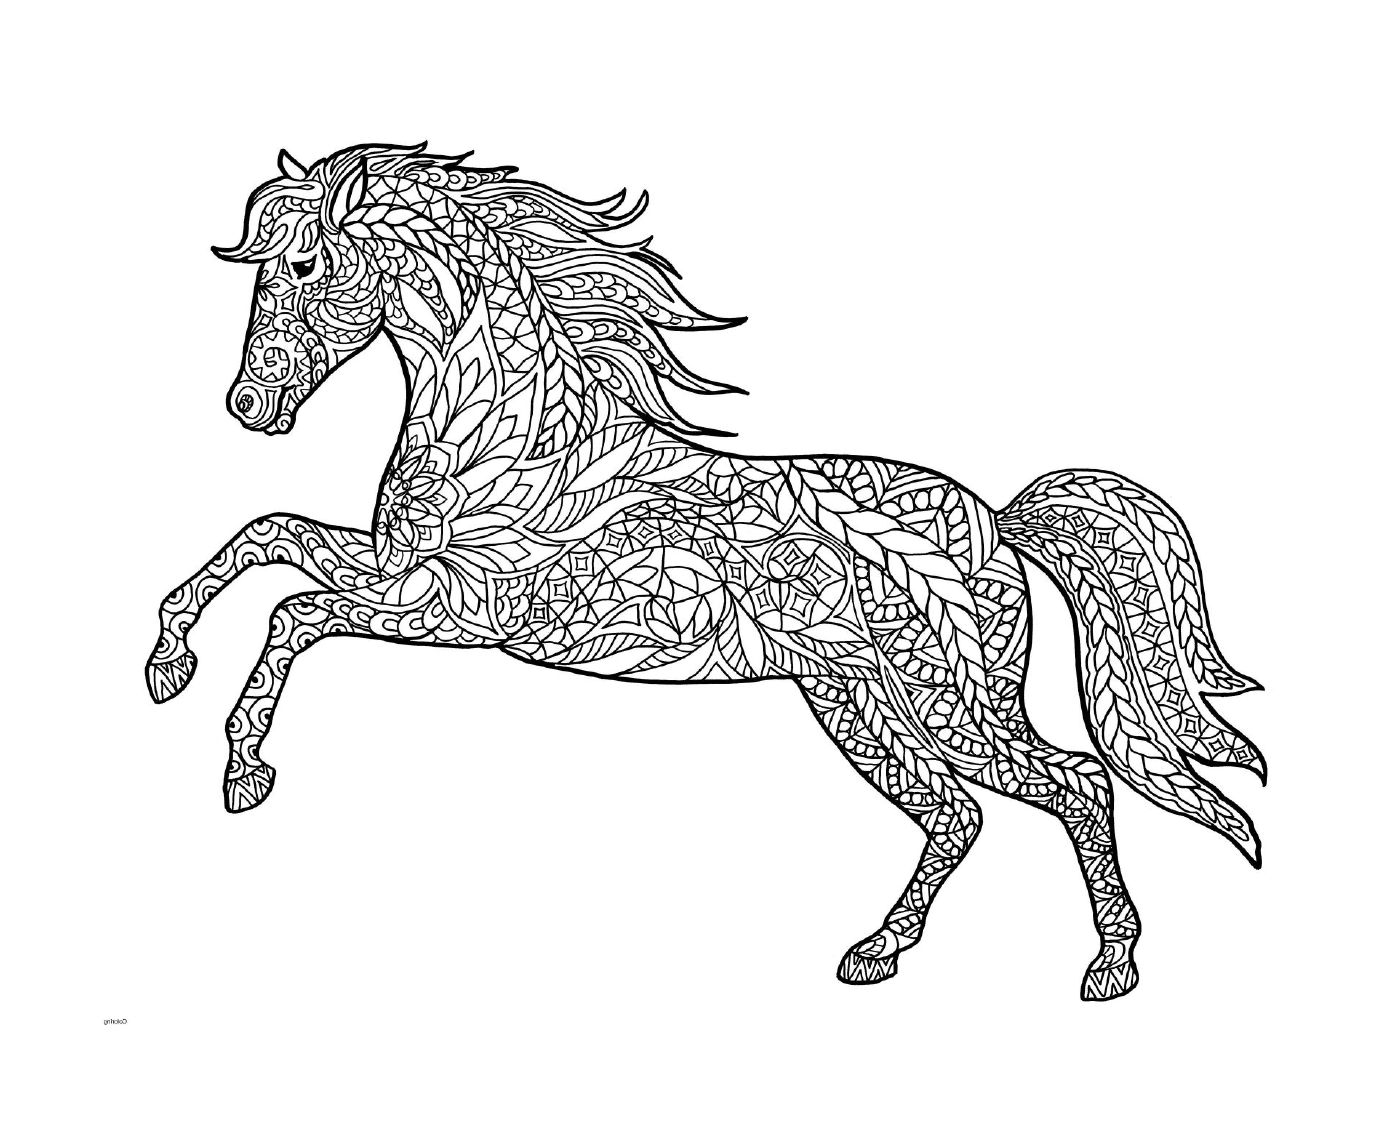  An adult of a galloping horse 